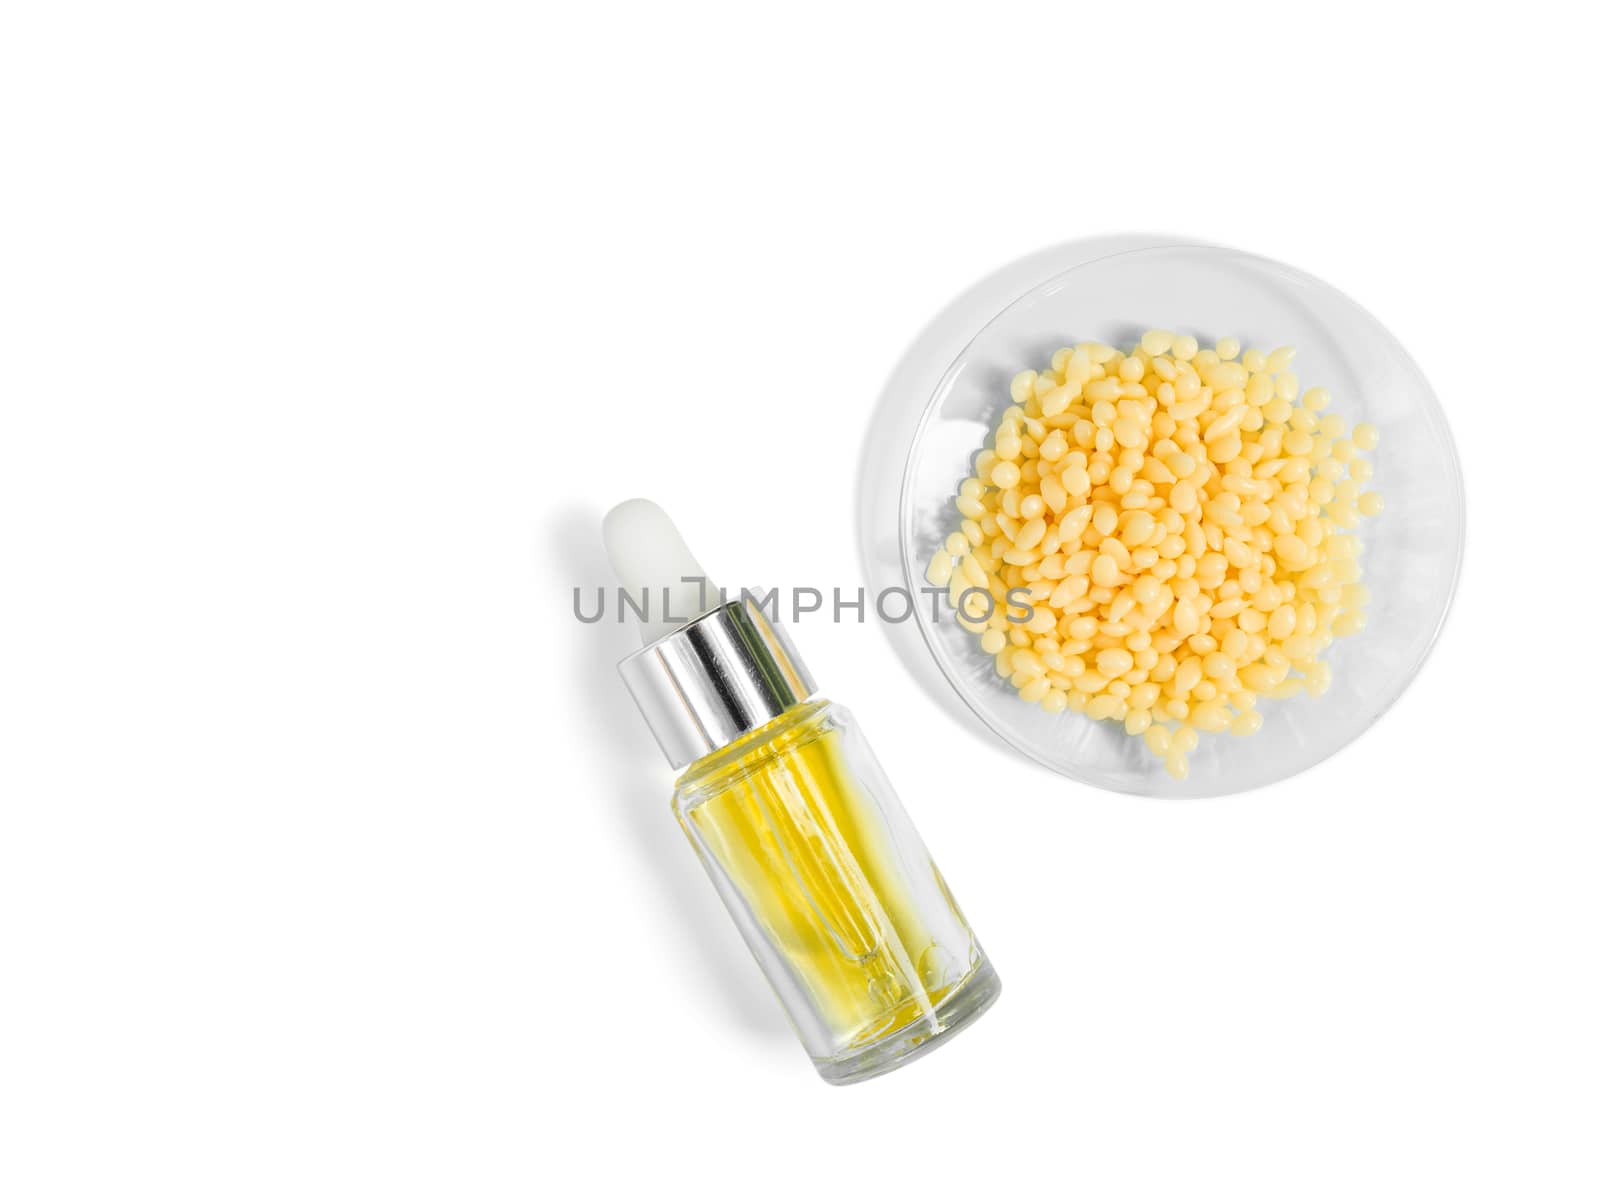 Candelilla Wax SP-75. Chemical ingredient for Cosmetics & Toiletries product. Yellow cosmetic color (oil). Chemicals for beauty care on a white background. (Top View)